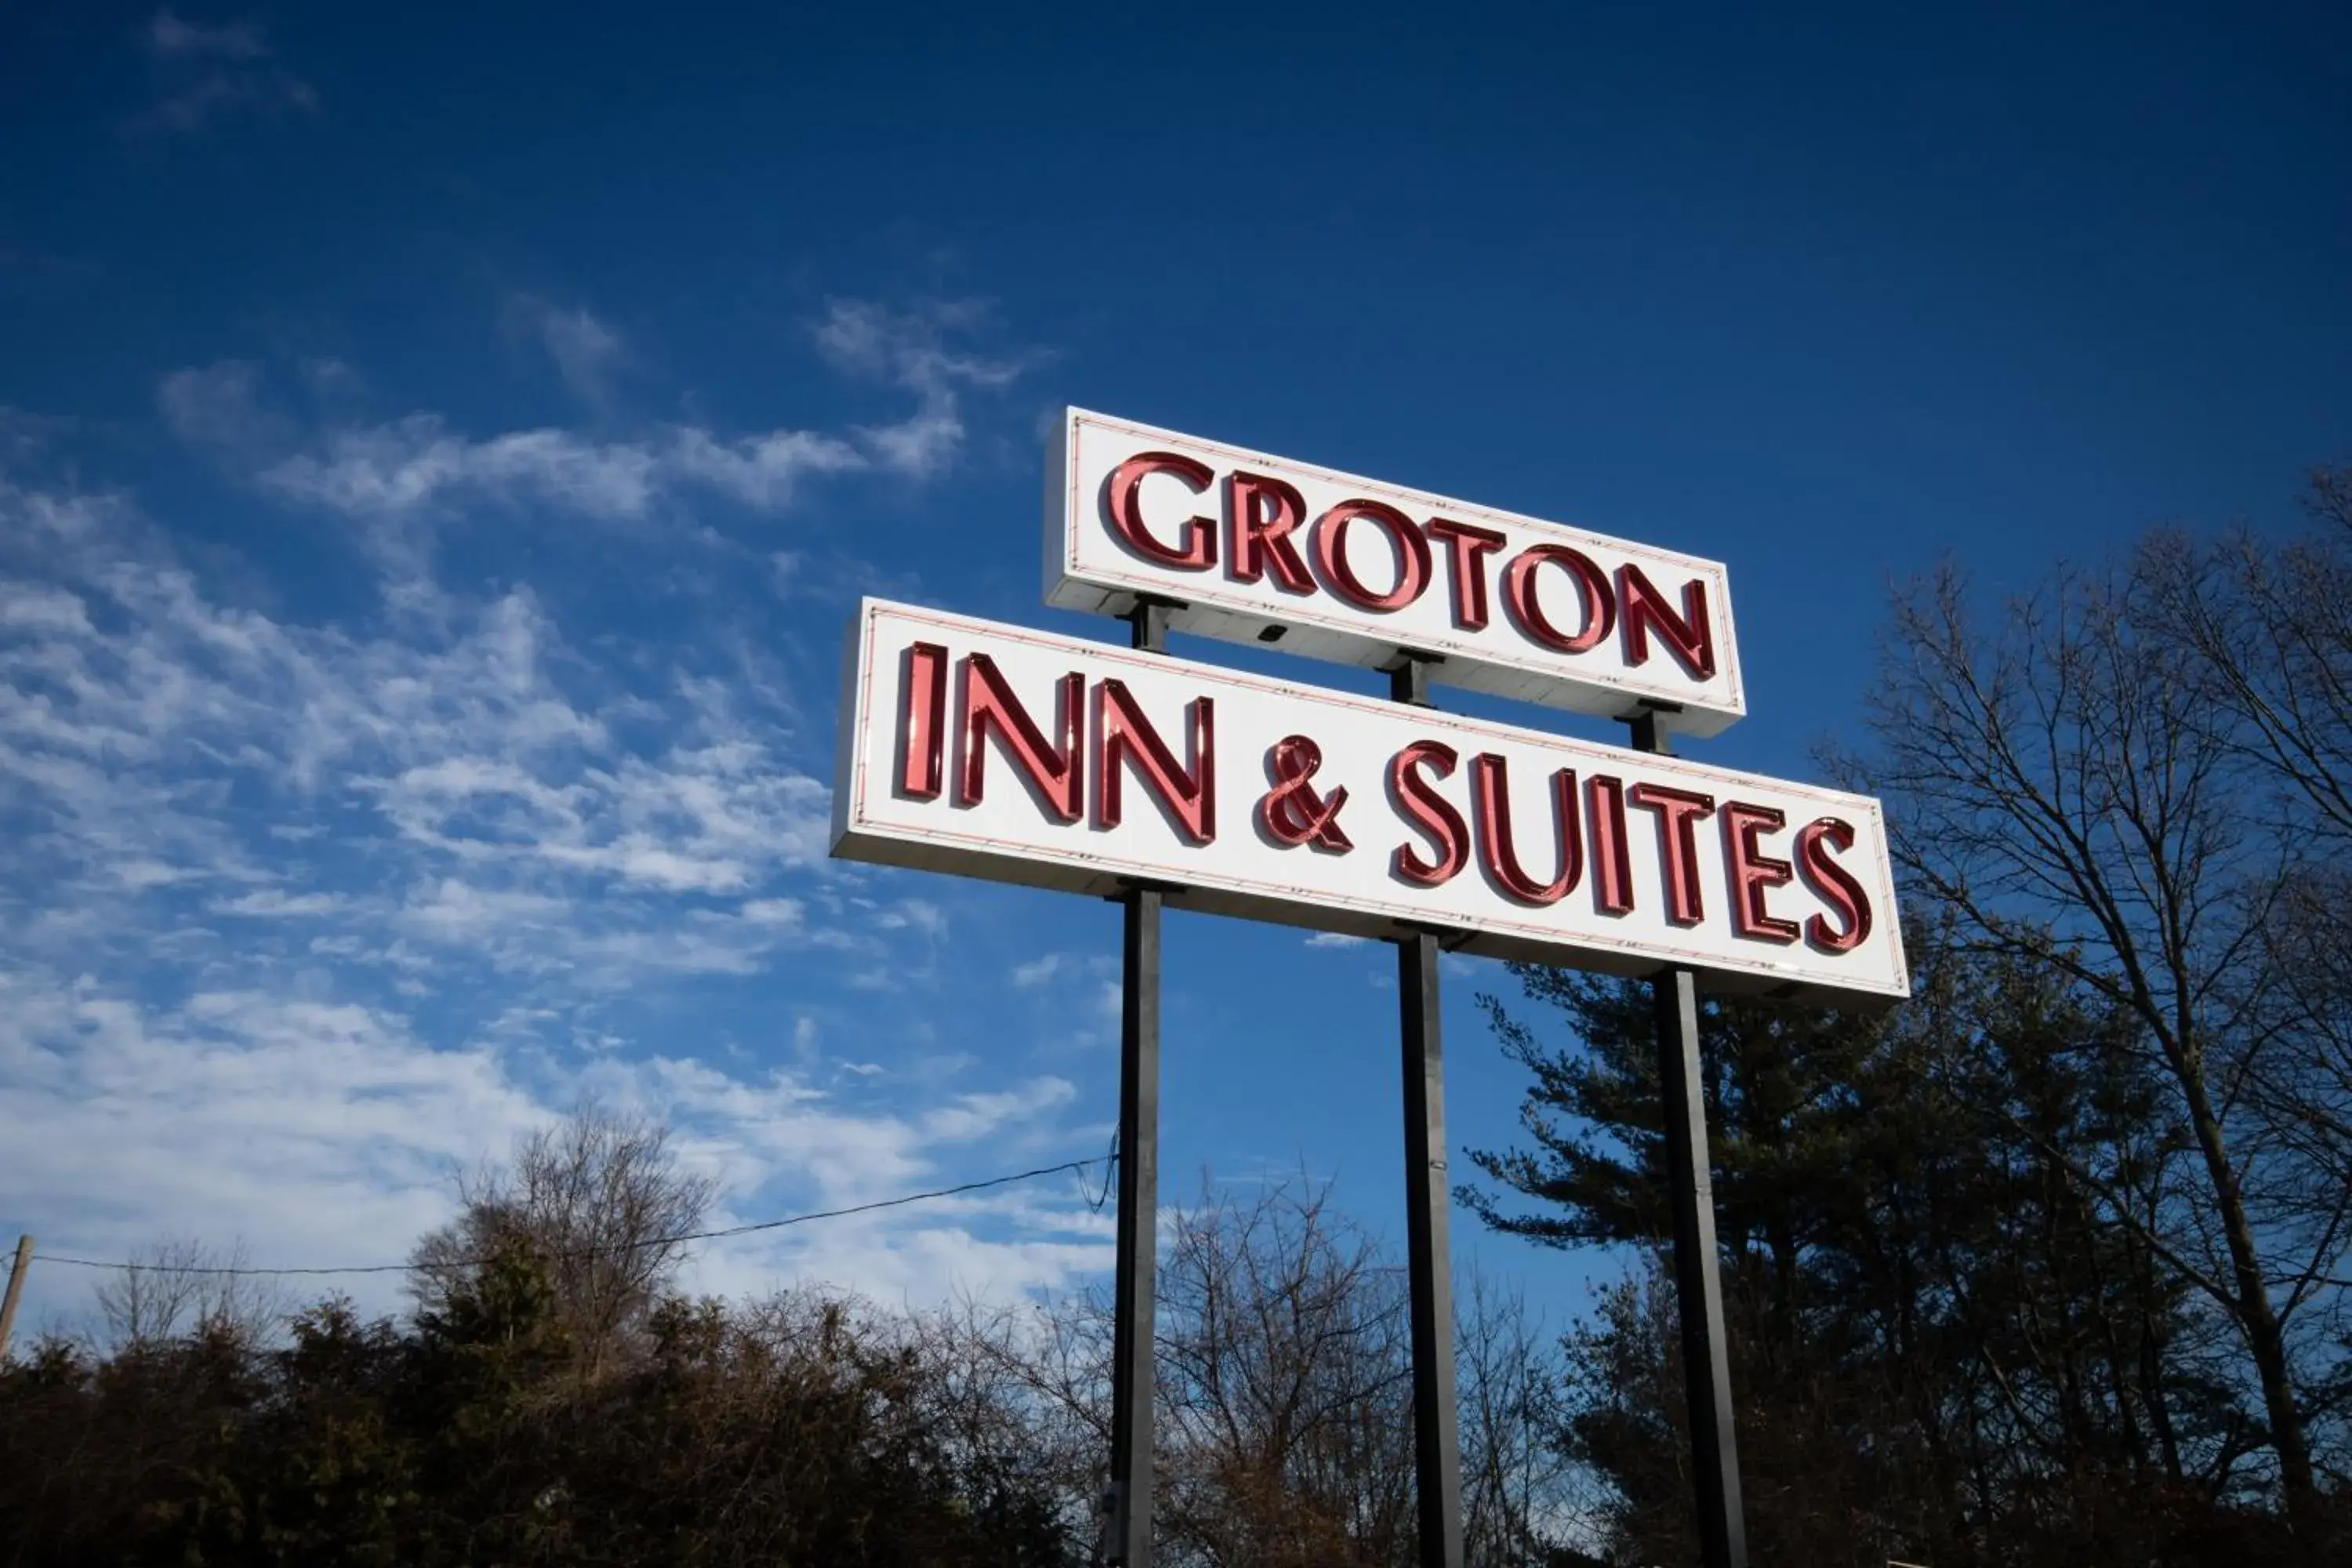 Day in Groton Inn & Suites